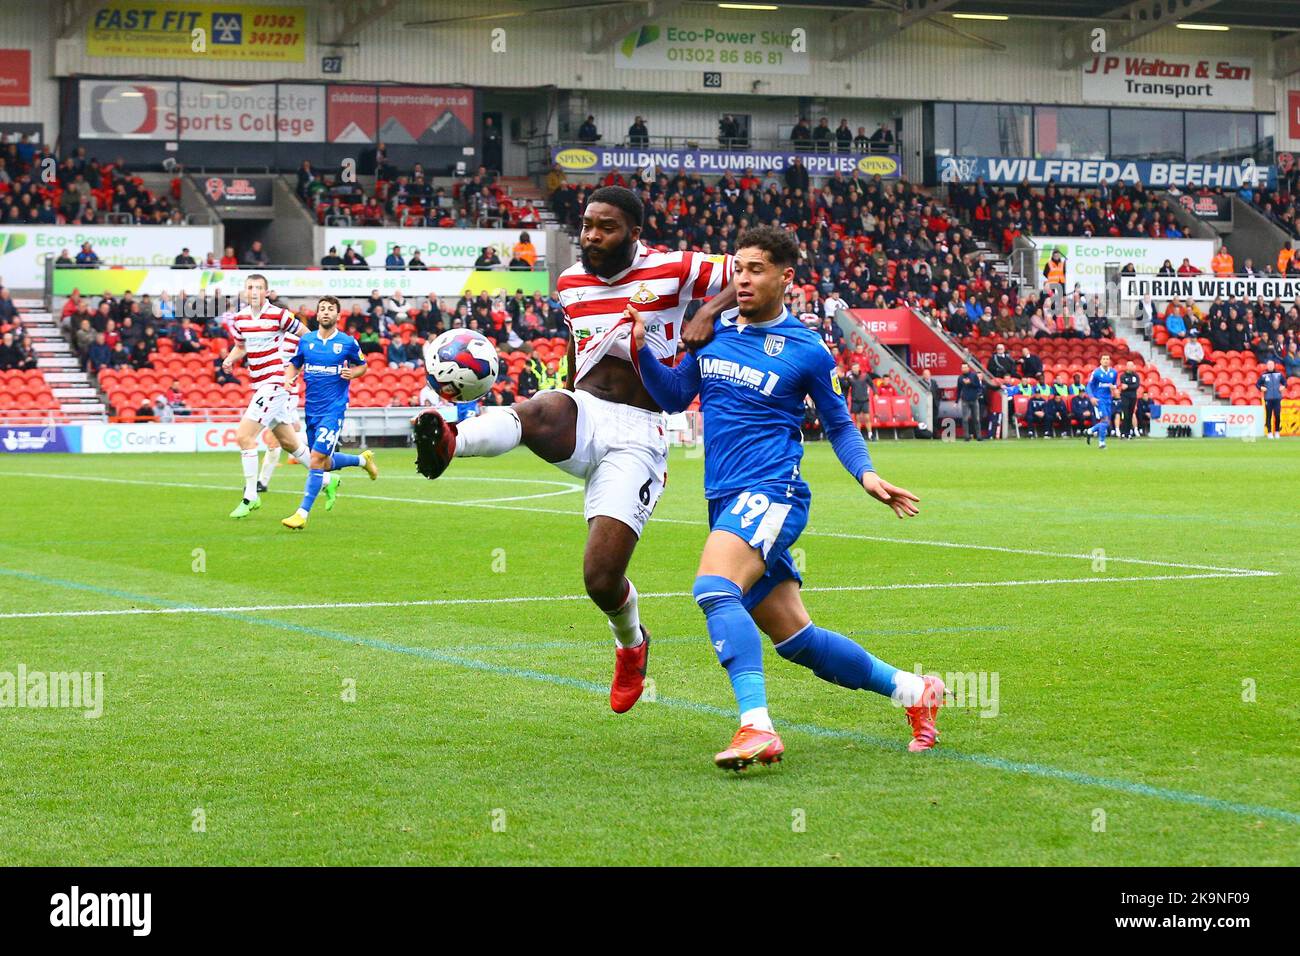 Eco - Power Stadium, Doncaster, England - 29th October 2022 Ro-Shaun Williams (6) of Doncaster Rovers clears the ball under pressure from Scott Kashket (24) of Gillingham - during the game Doncaster Rovers v Gillingham, Sky Bet League Two,  2022/23, Eco - Power Stadium, Doncaster, England - 29th October 2022 Credit: Arthur Haigh/WhiteRosePhotos/Alamy Live News Stock Photo